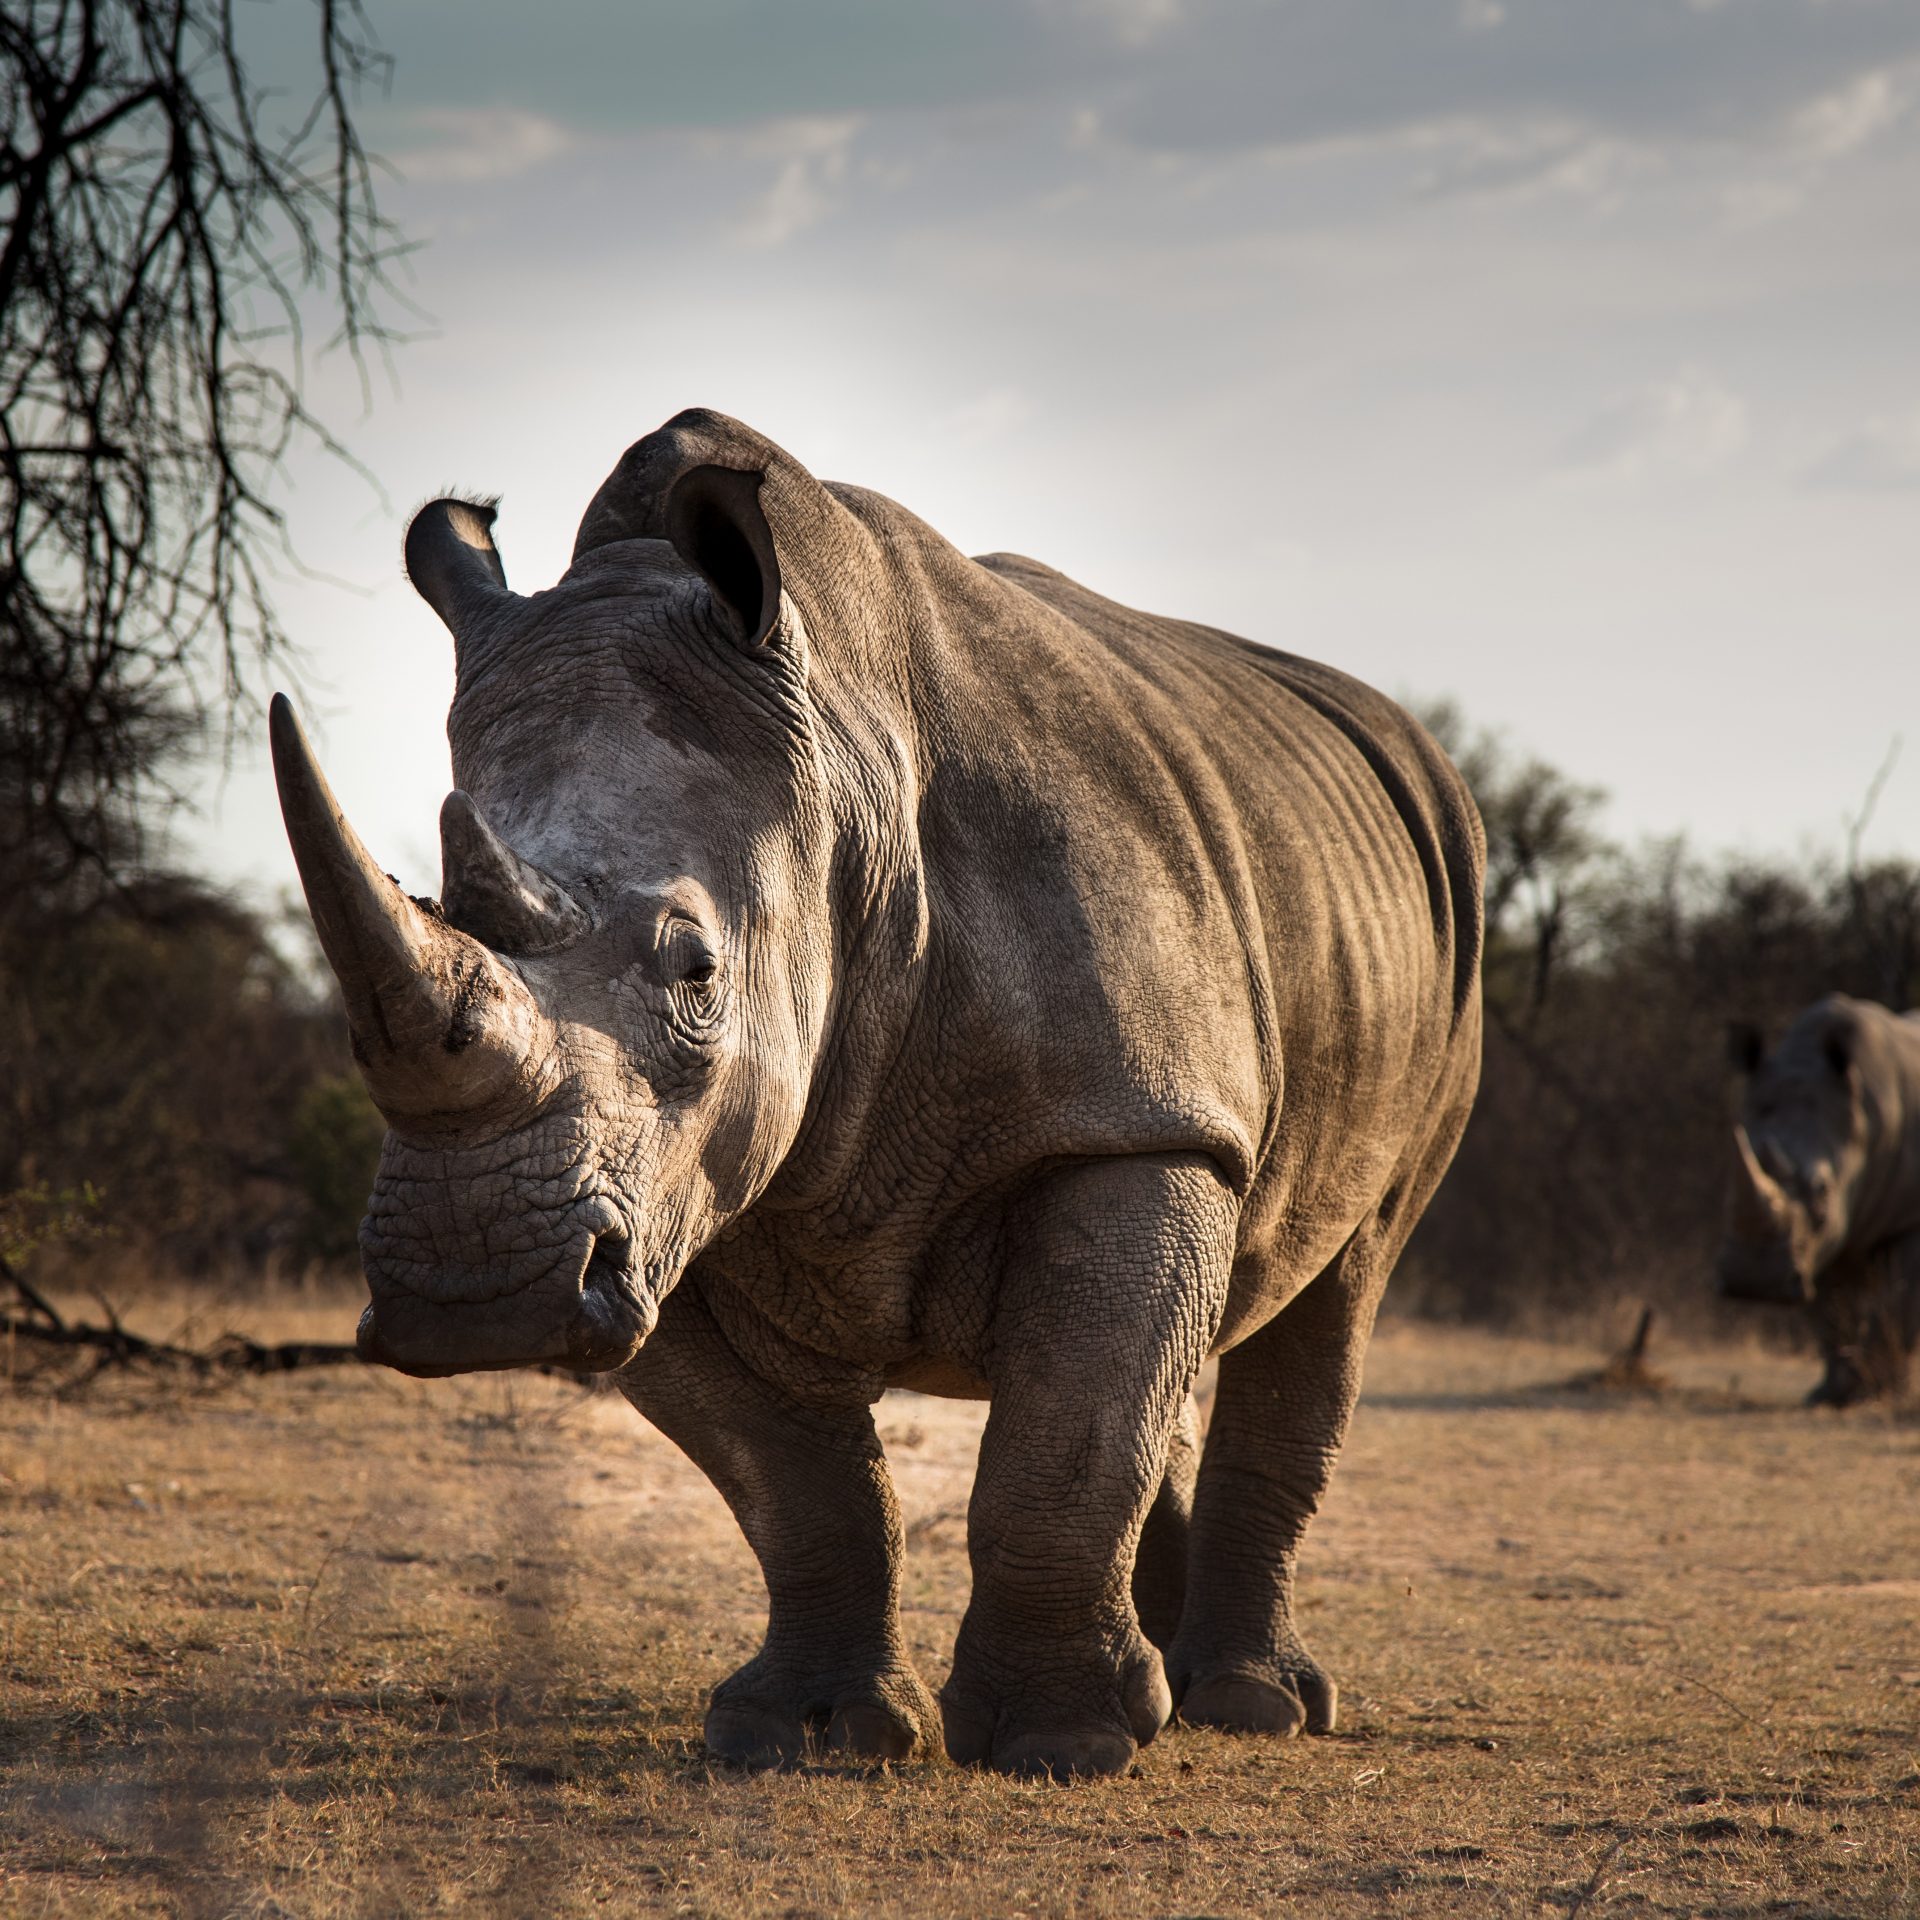 Endangered rhino numbers ‘soar by 1,000%’ in Tanzania after crackdown on poaching gangs